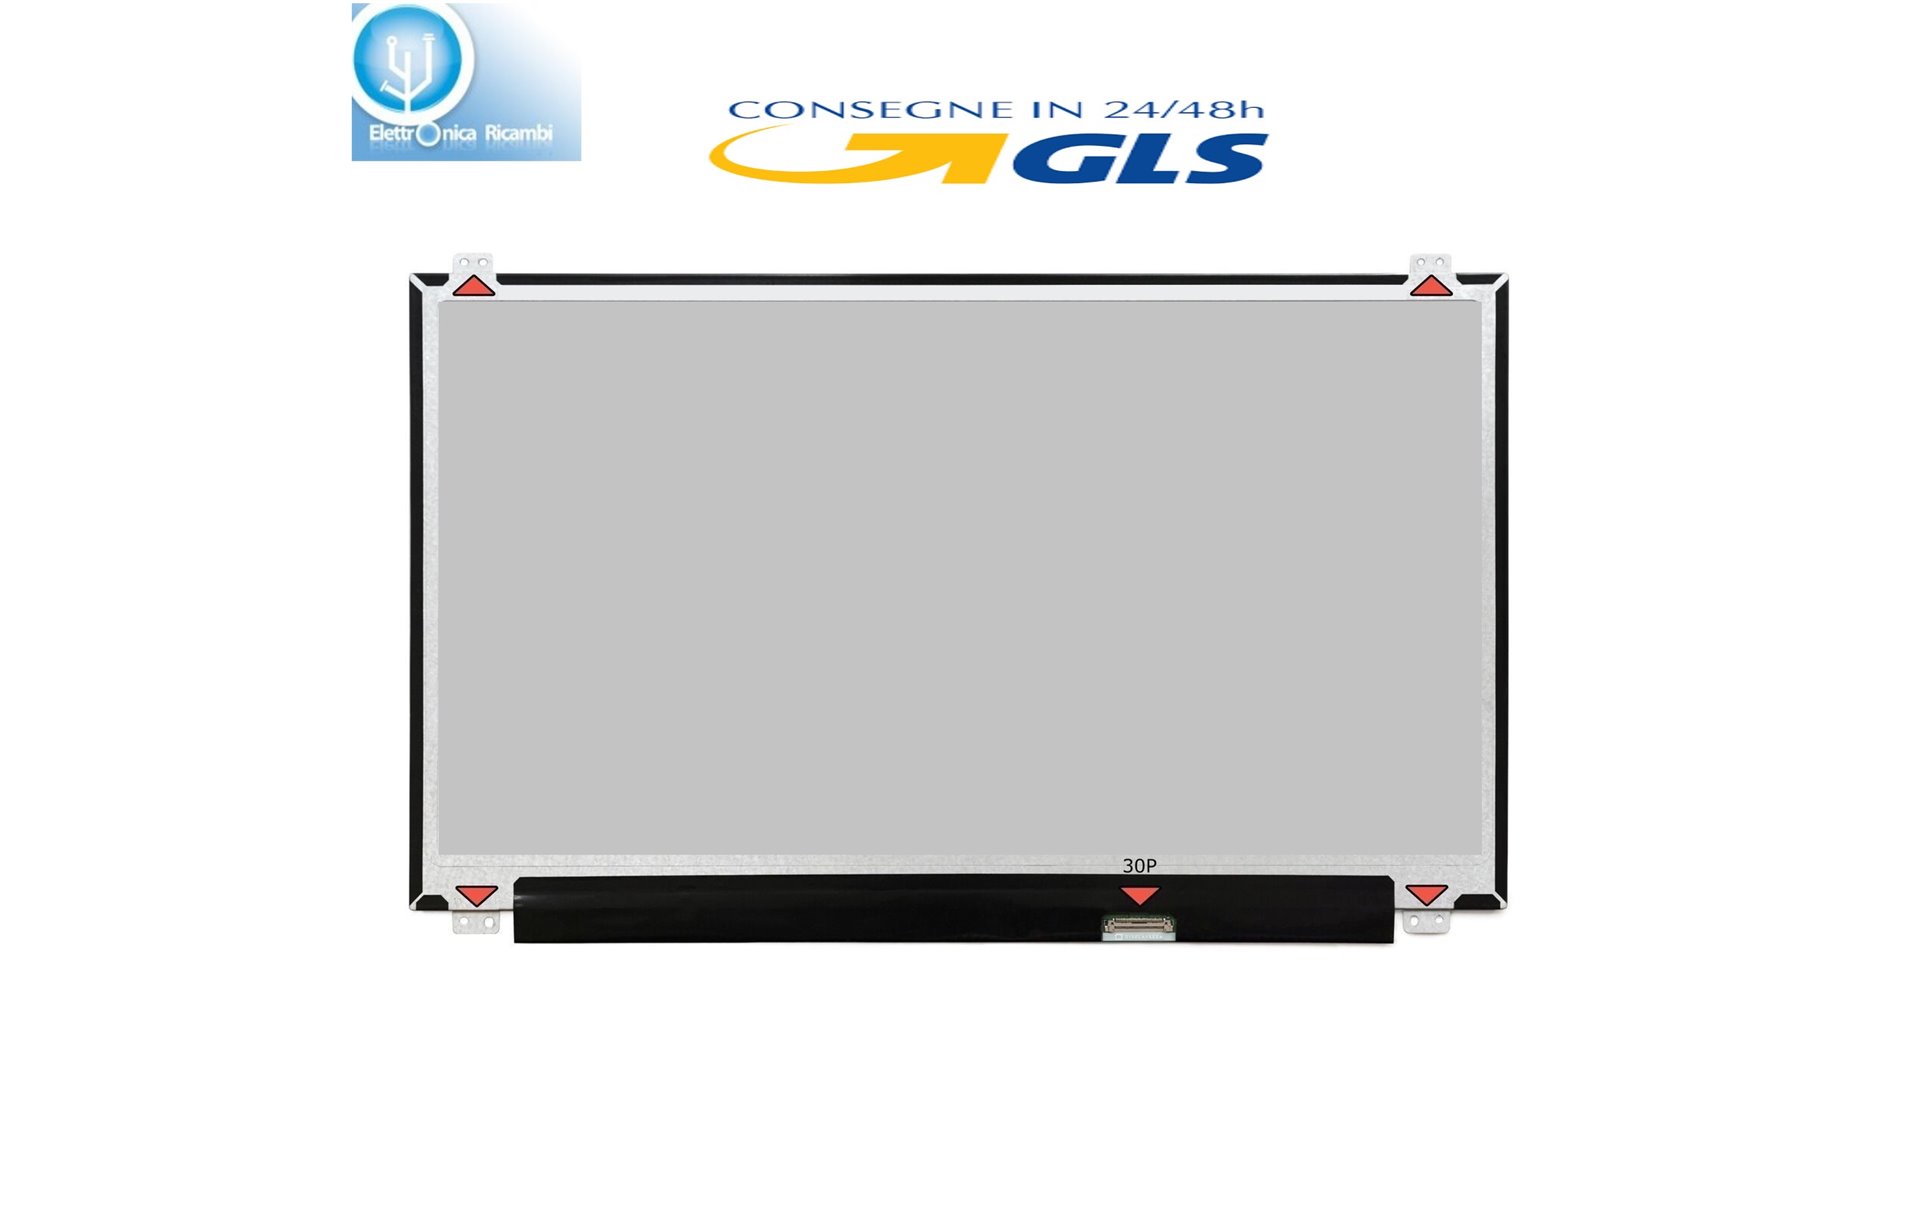 DISPLAY LCD Acer ASPIRE VX15 V3-575 15.6 WideScreen (13.6"x7.6") LED"